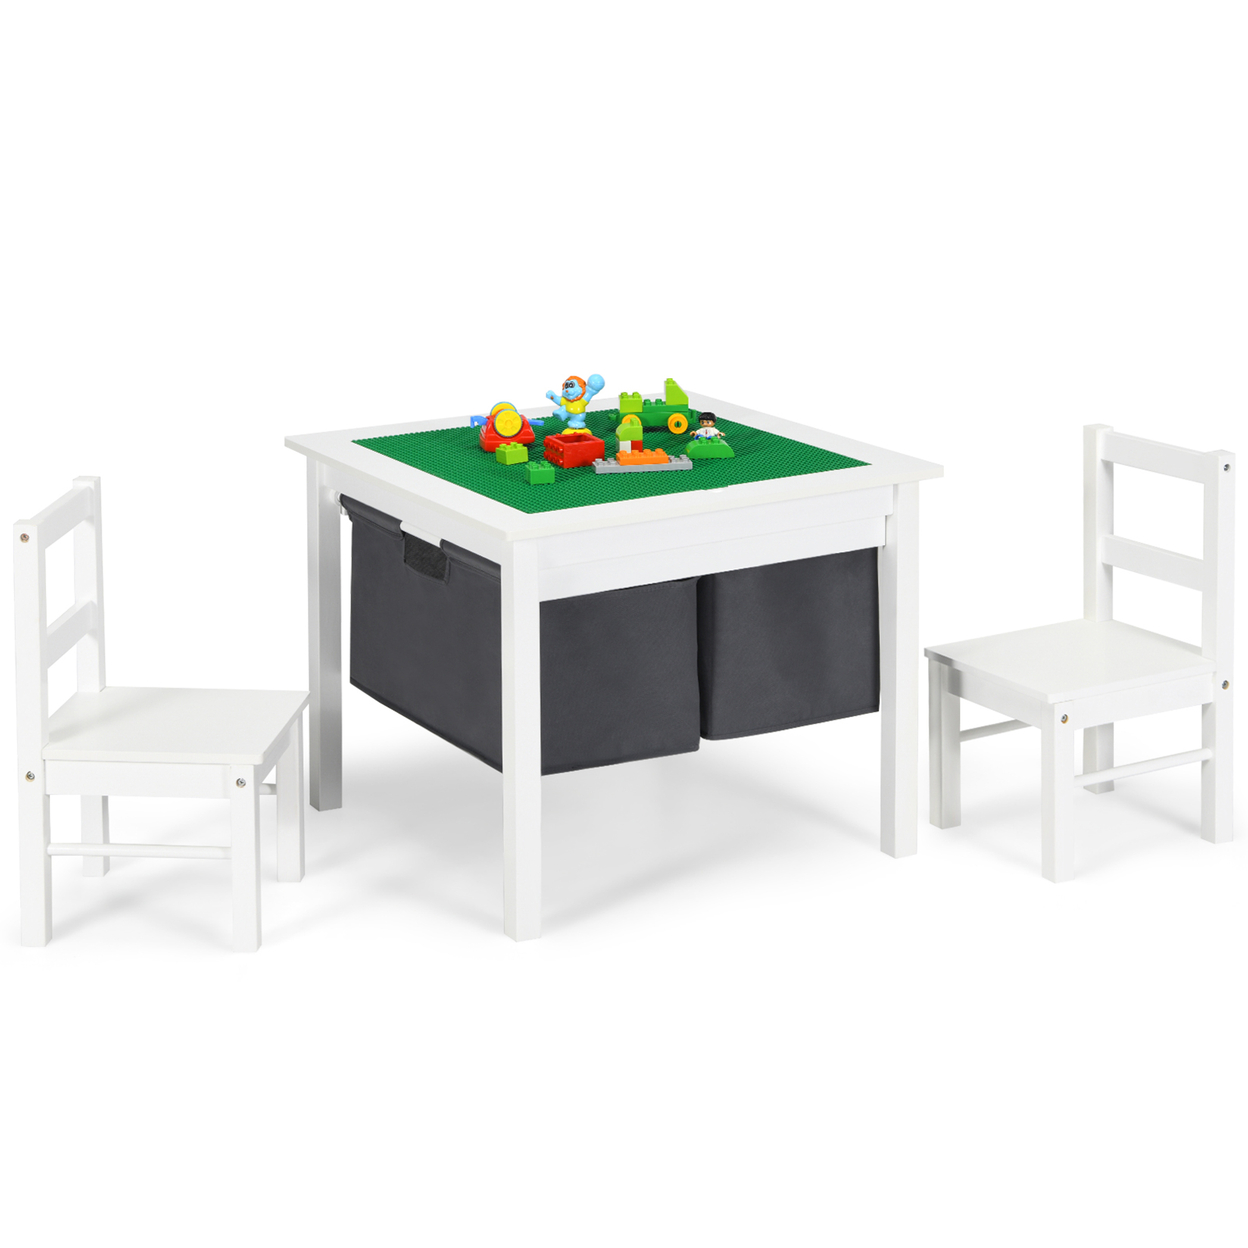 2-in-1 Kids Activity Table & 2 Chairs Set W/Storage Building Block Table - White